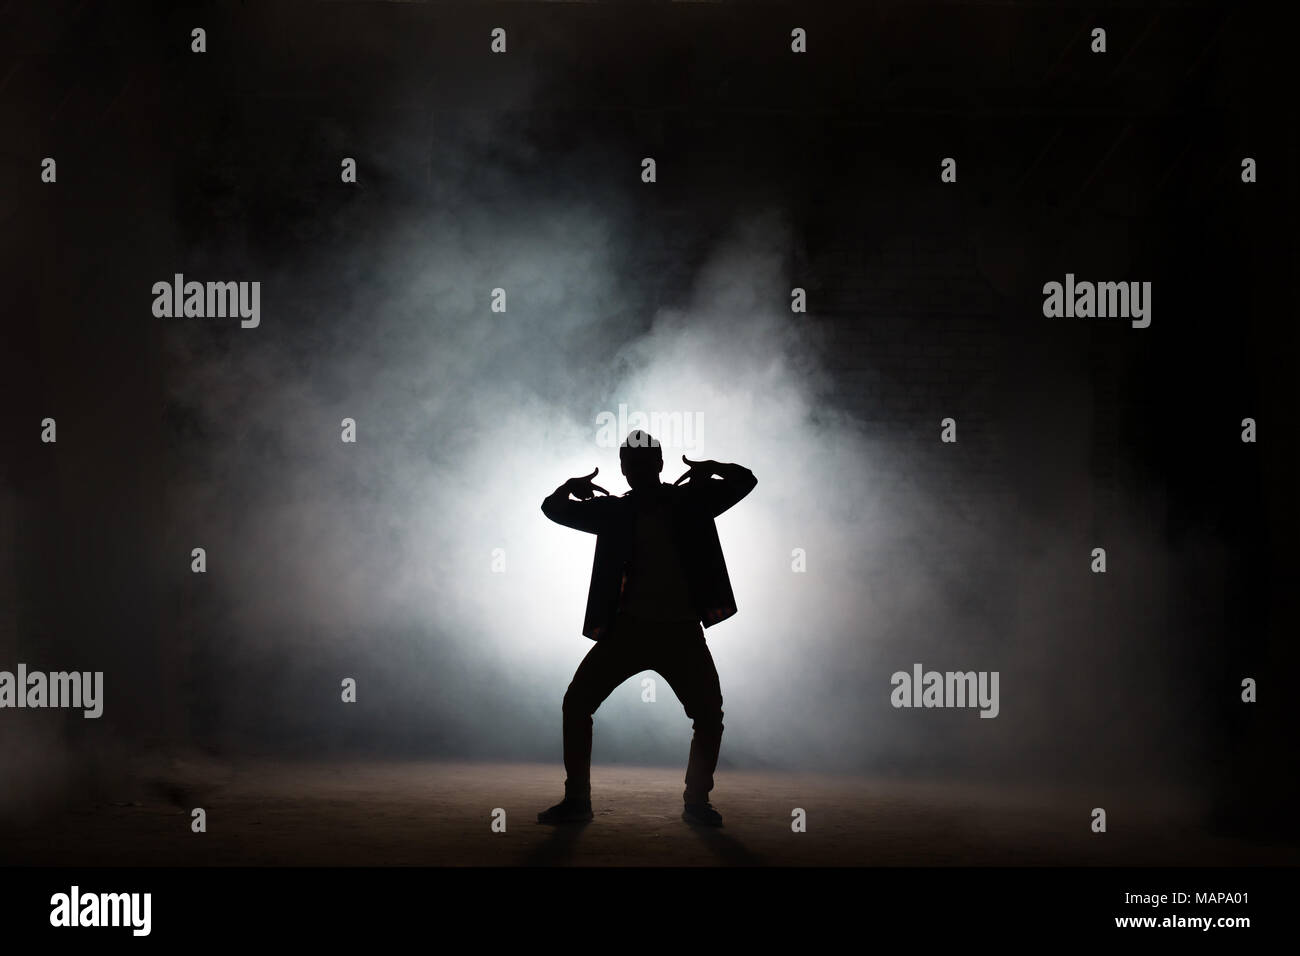 rapper dancing isolated on black background Stock Photo